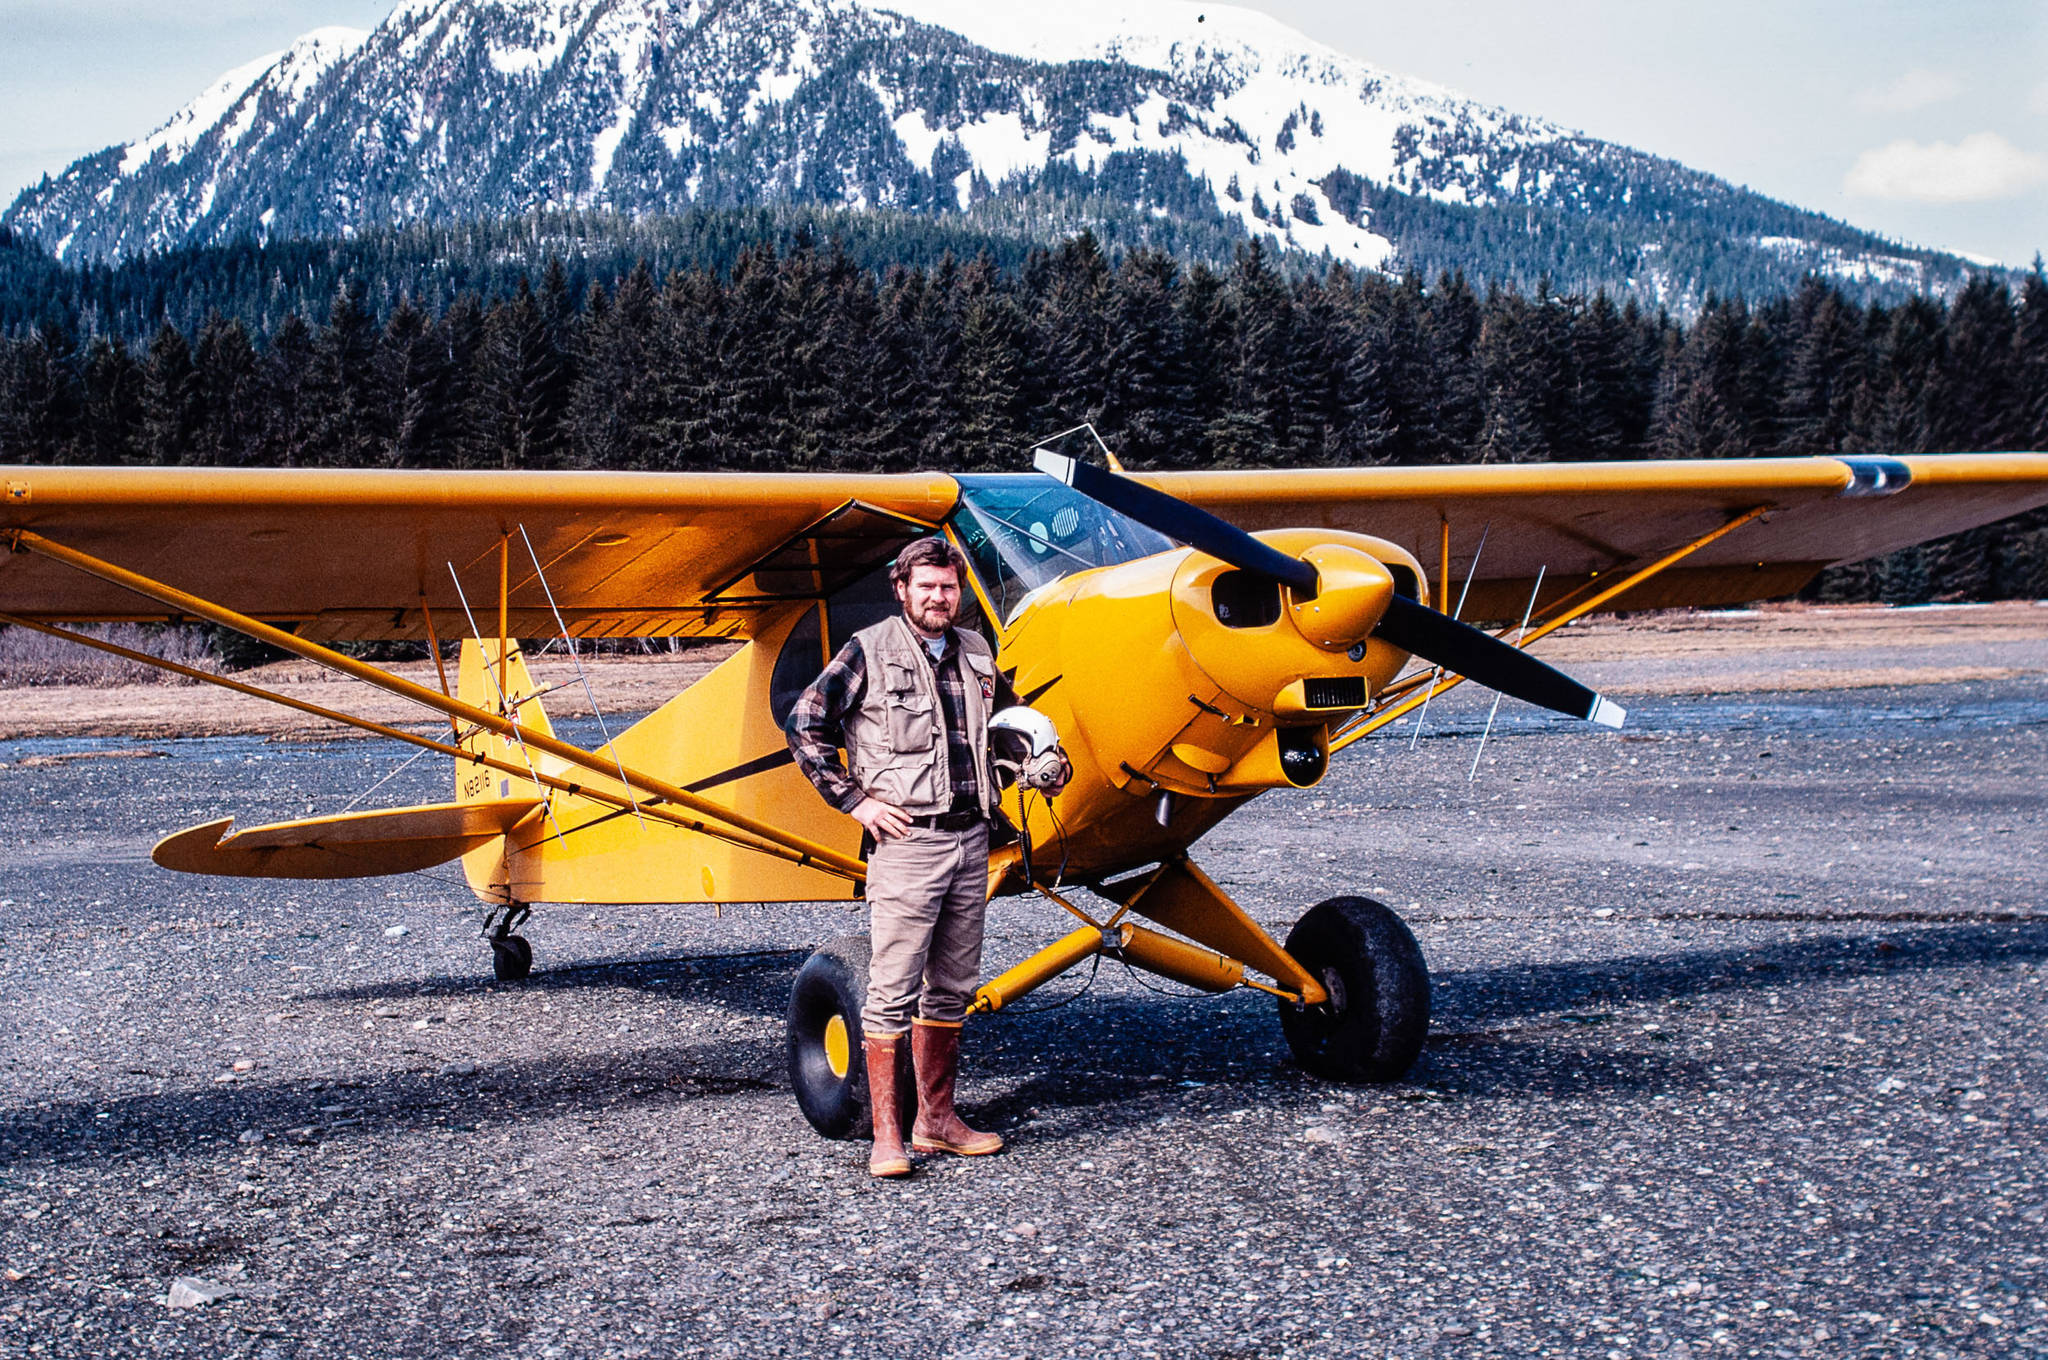 Biologist John Schoen with the Super Cub on a beach on Admiralty Island. The two antennas under each wing were used to determine which direction had the strongest signal from radio-collared animals. They then could locate the animals within an area about the size of an acre. (Photo by John Schoen)